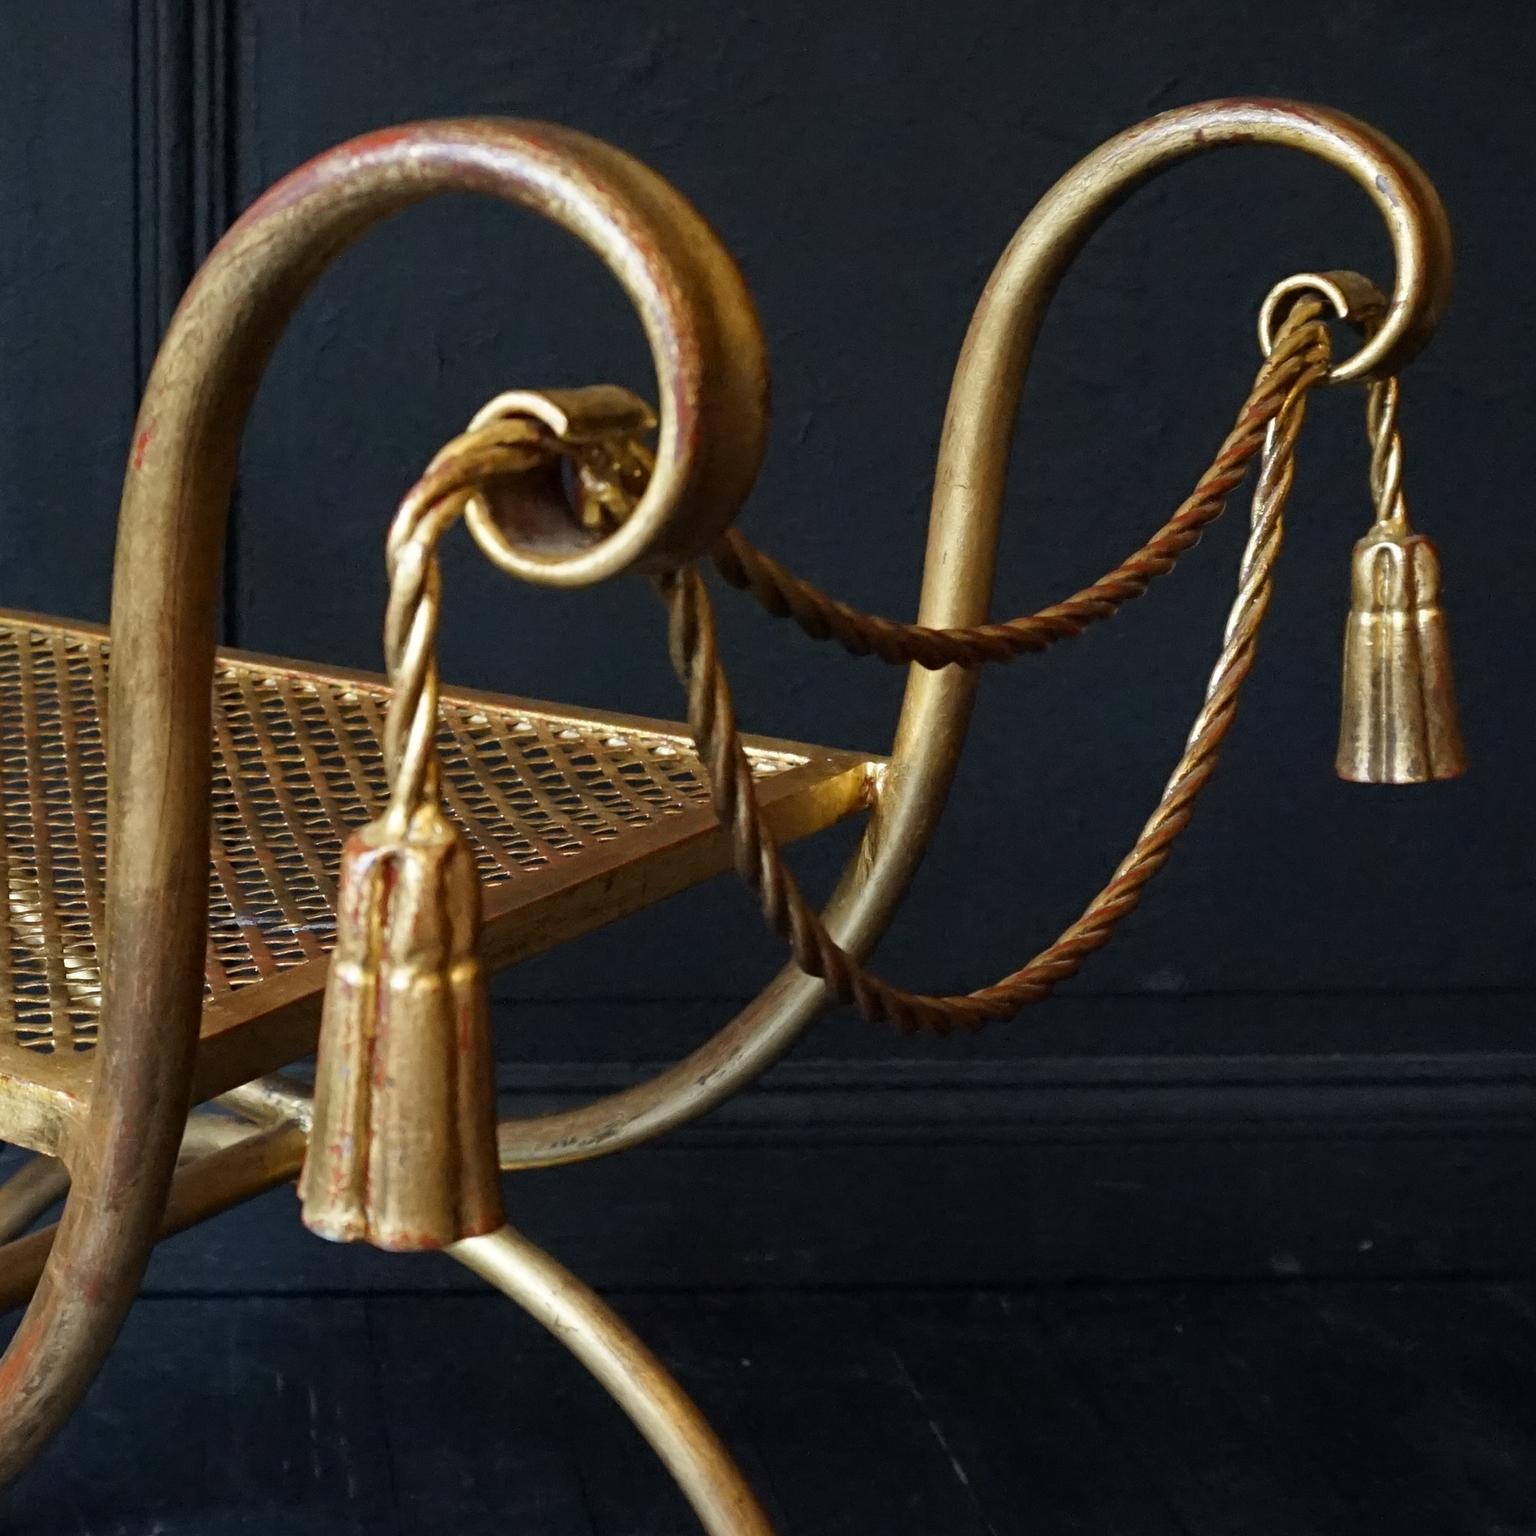 1950s Italian Midcentury Gilt Metal Rope and Tassel Stool and Umbrella Stand For Sale 5